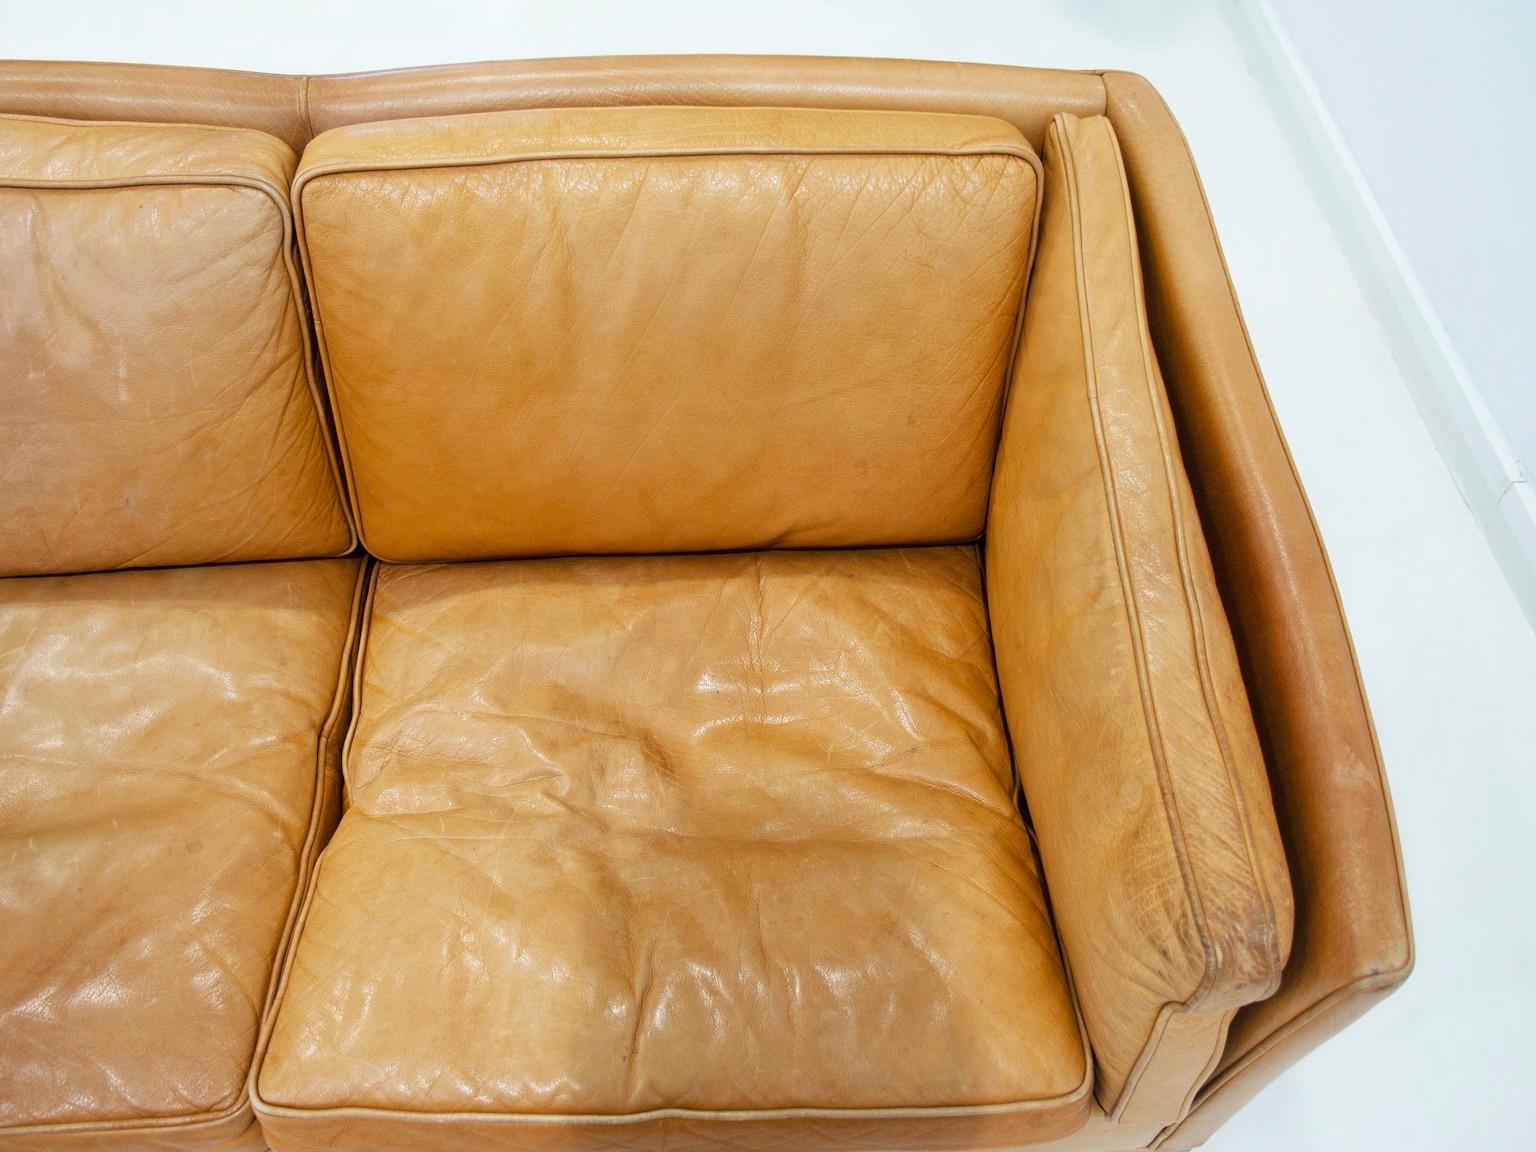 20th Century Scandinavian Modern Caramel Brown Leather Two Seat Sofa For Sale